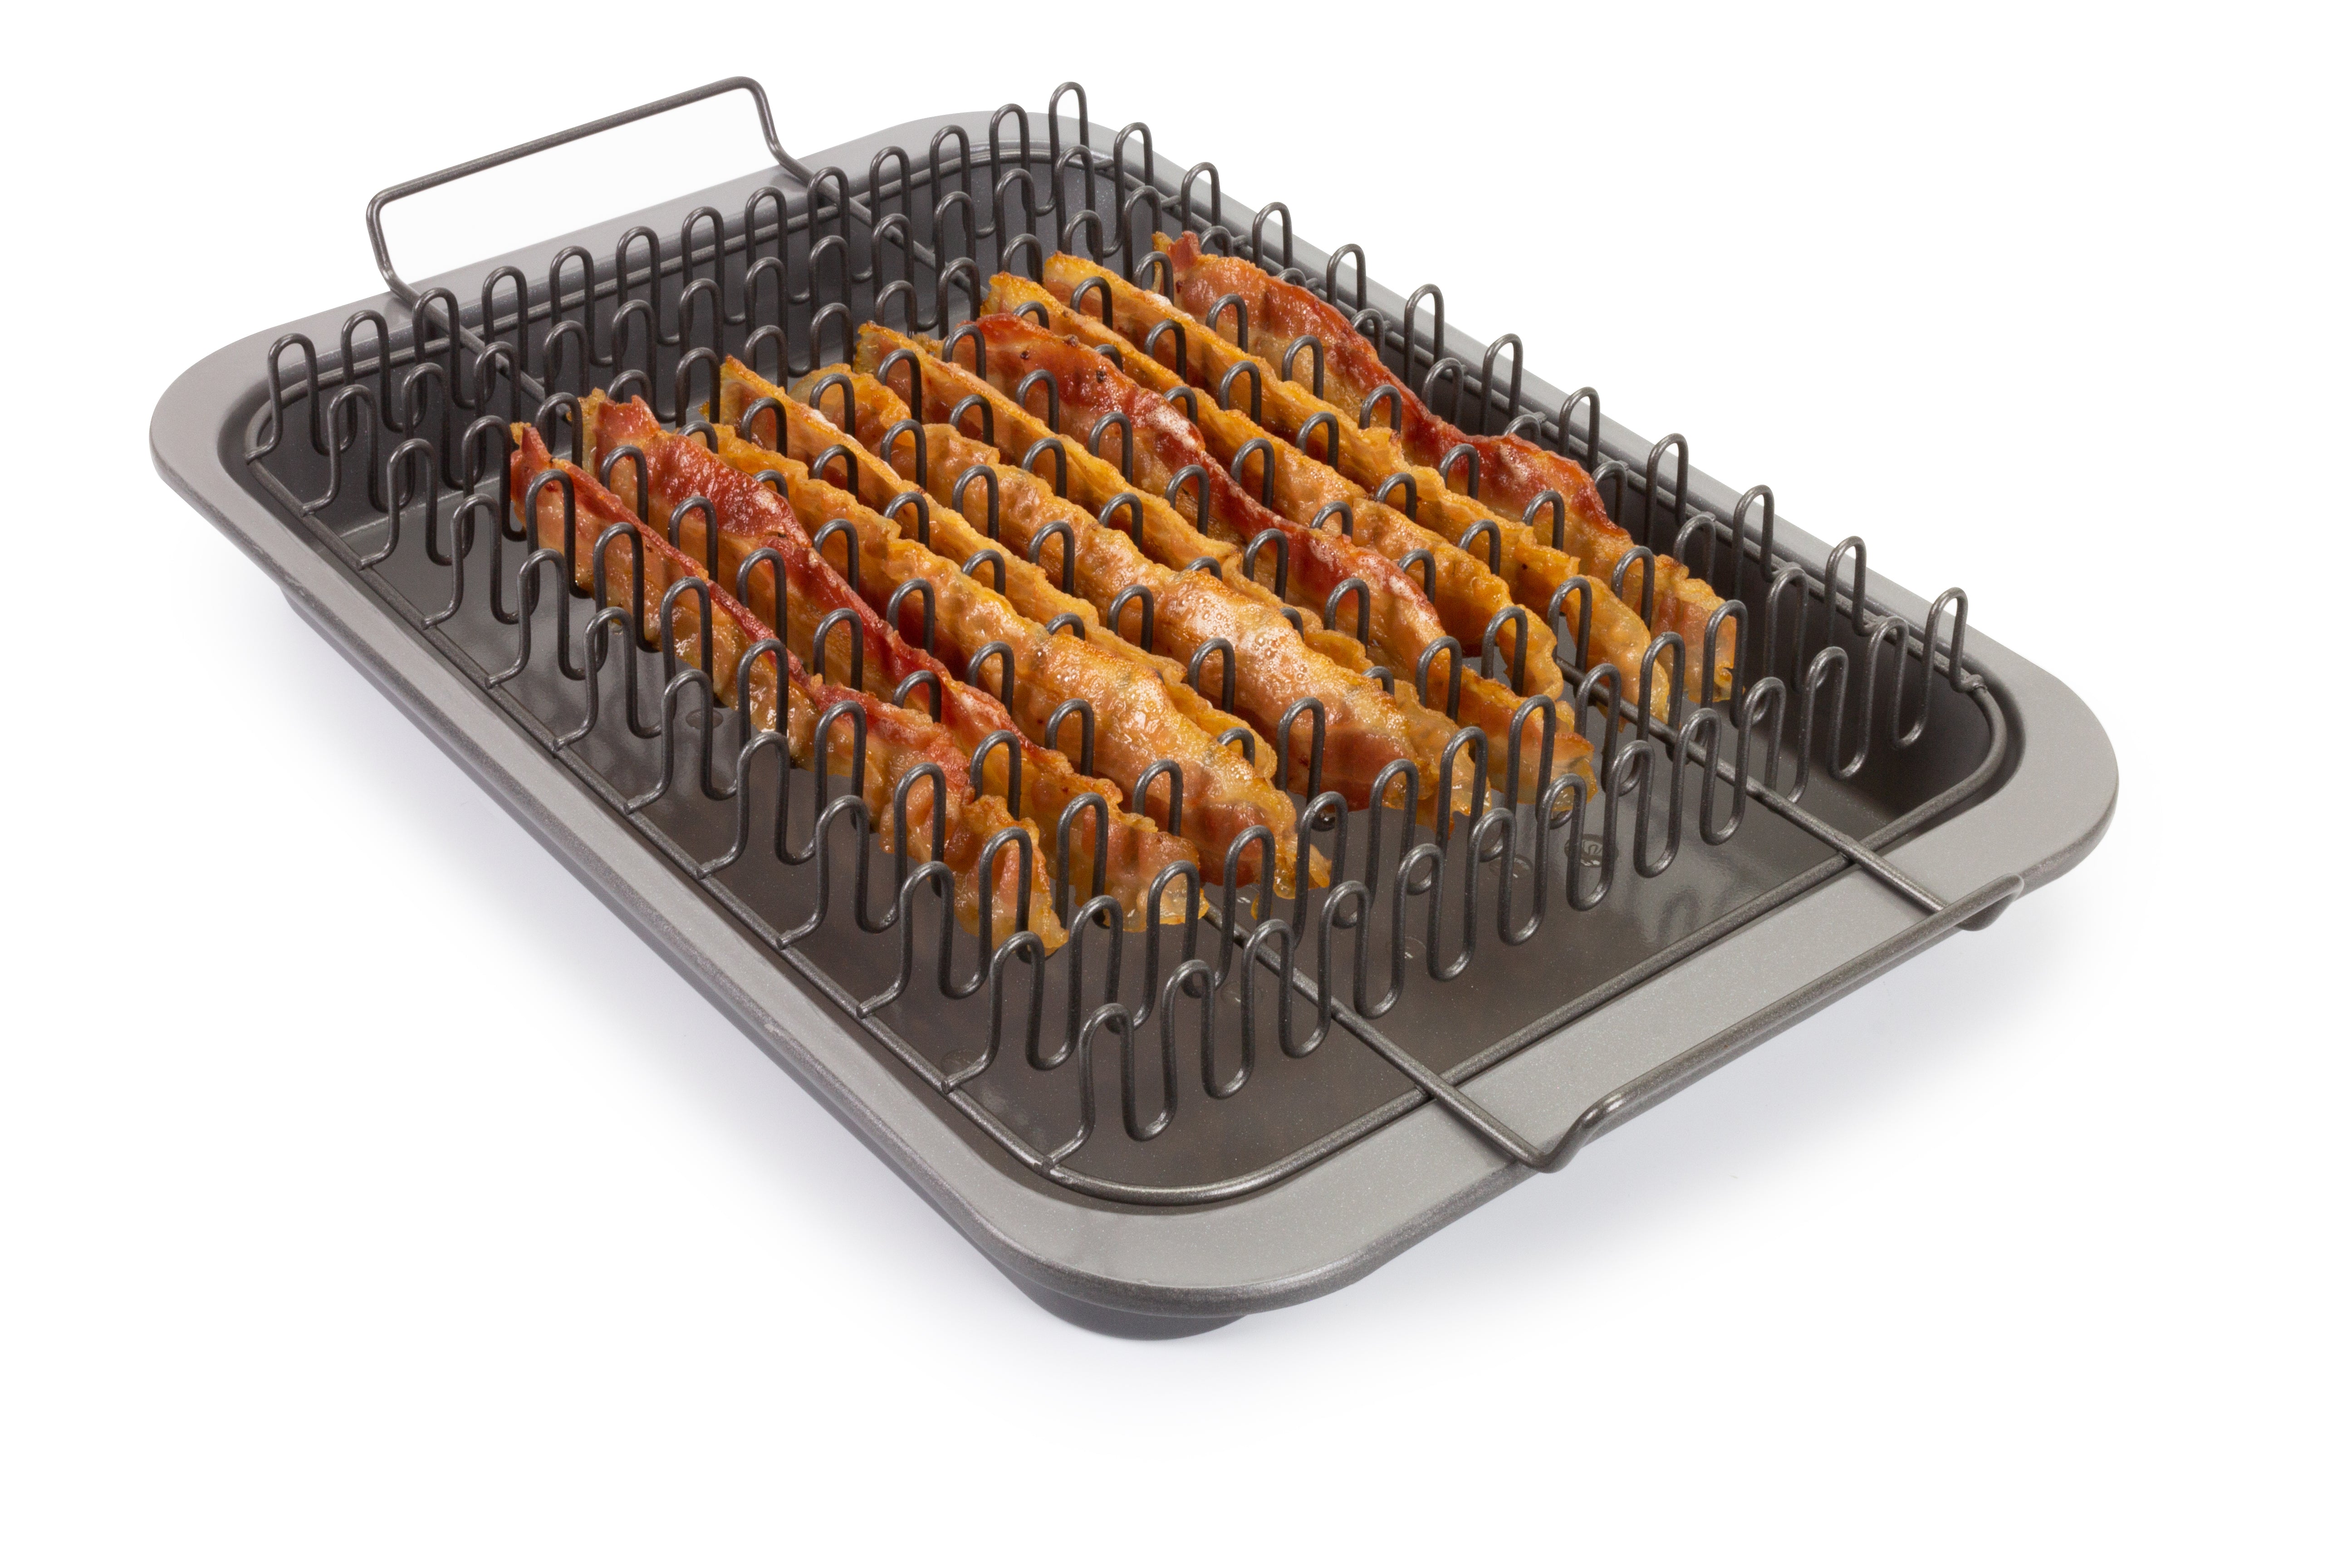 Eazy Mealz Bacon Rack & Tray Set, Rack and Grease Catcher, Non-Stick, Large, Gray